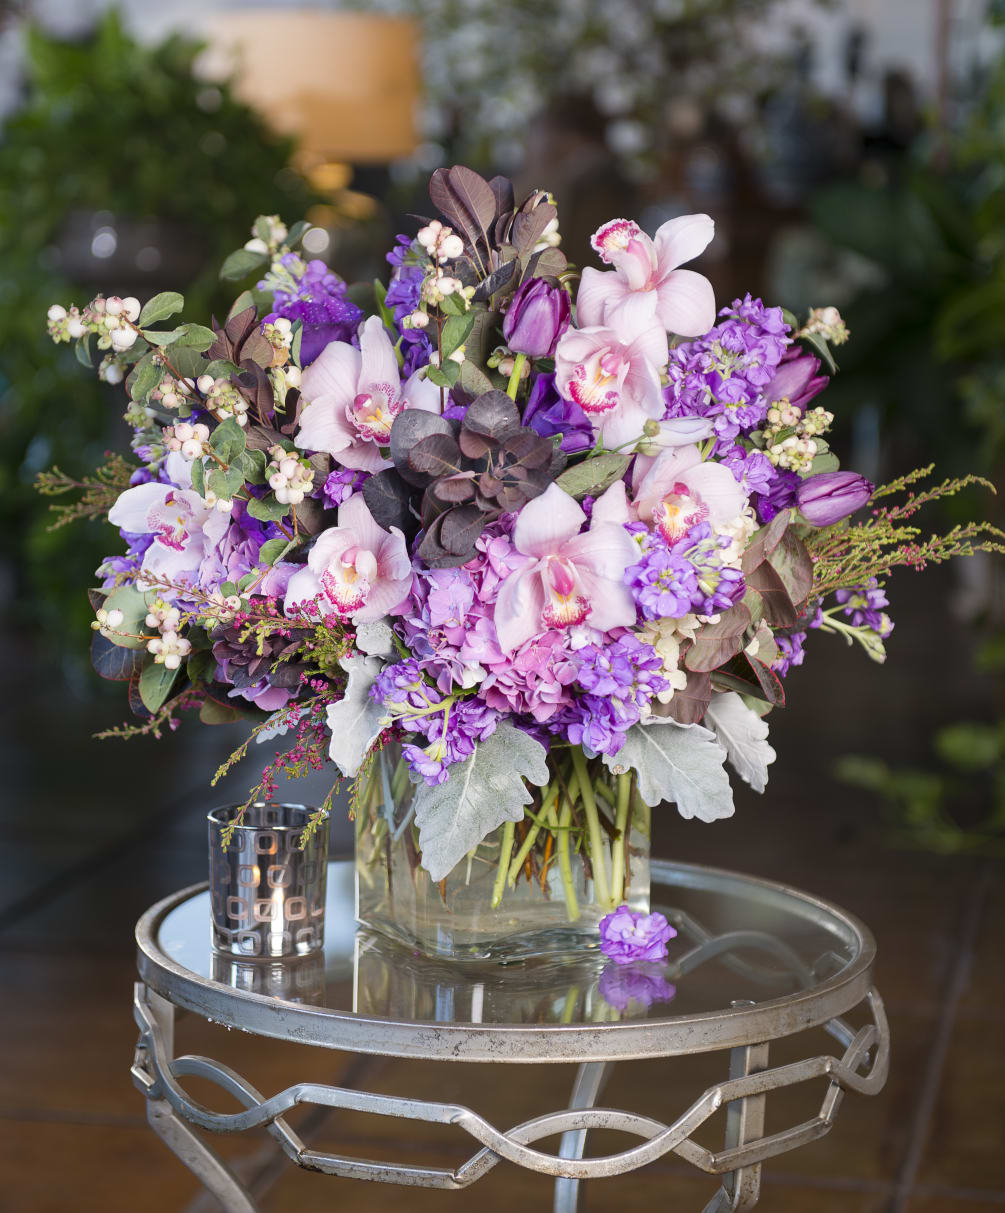 A mix of cymbidium orchids, stock, hydrangea, snowberries, stock, dusty miller and